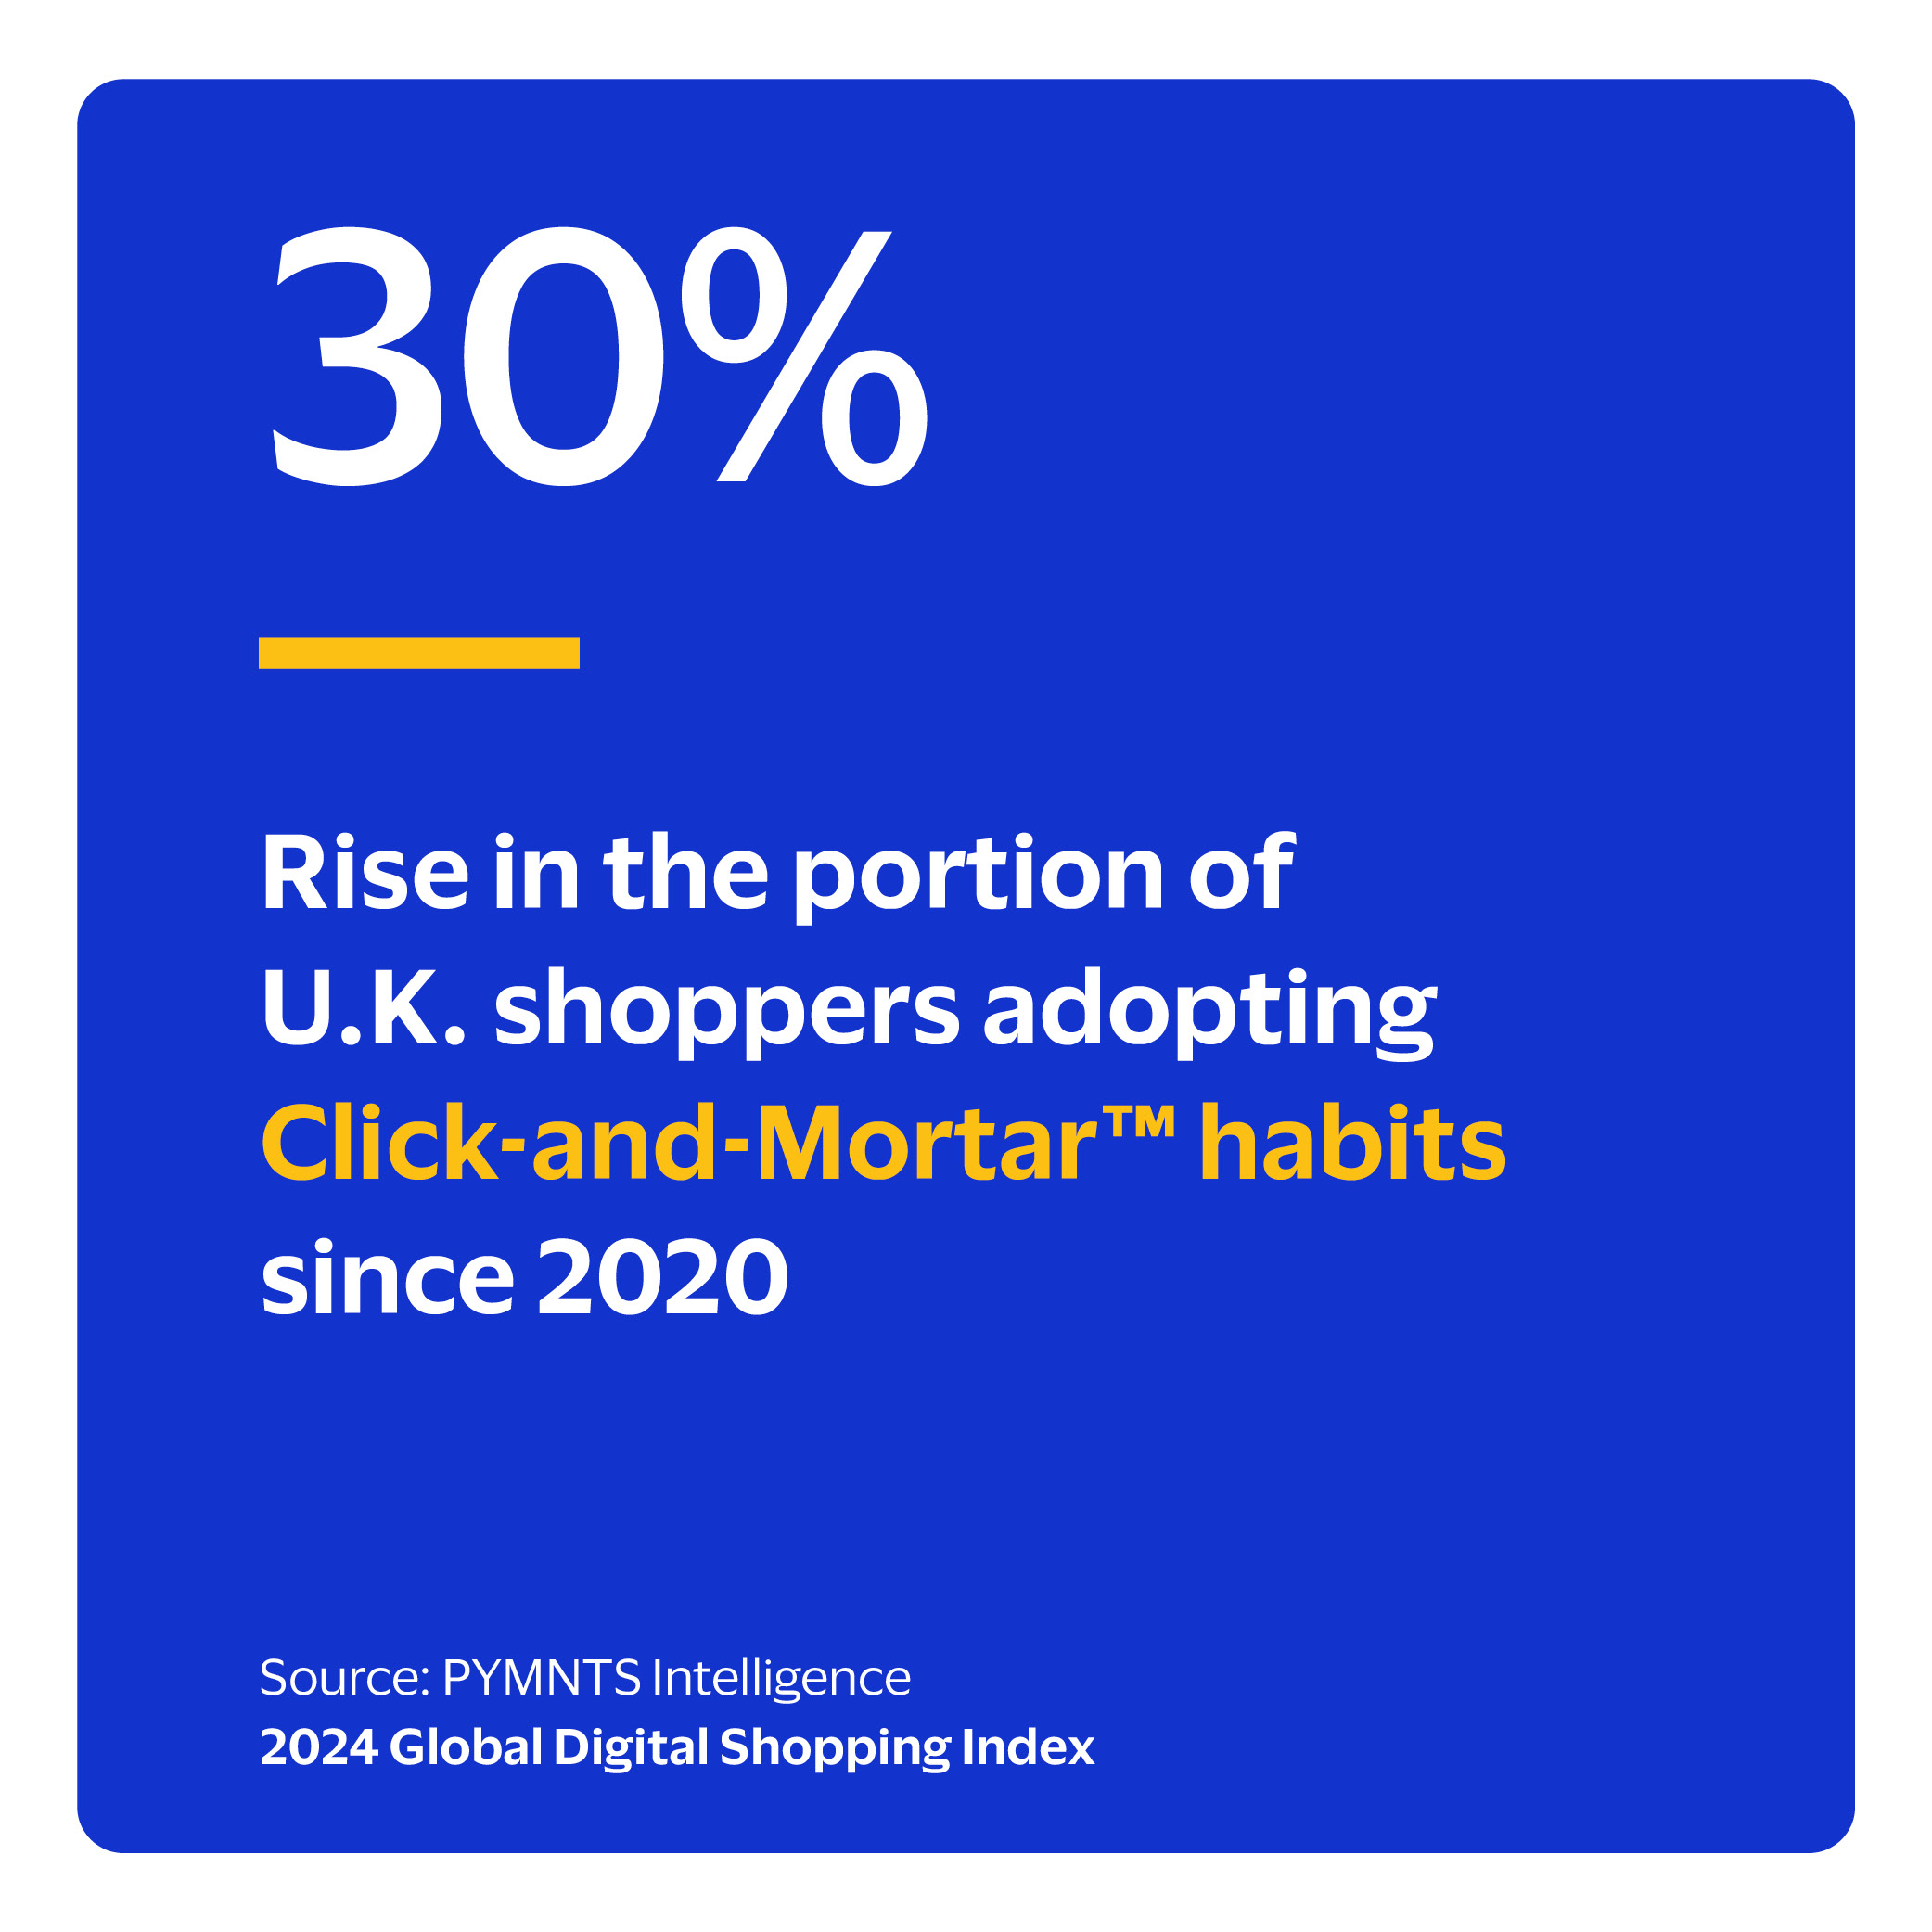  Rise in the portion of U.K. shoppers adopting Click-and-Mortar™ habits since 2020